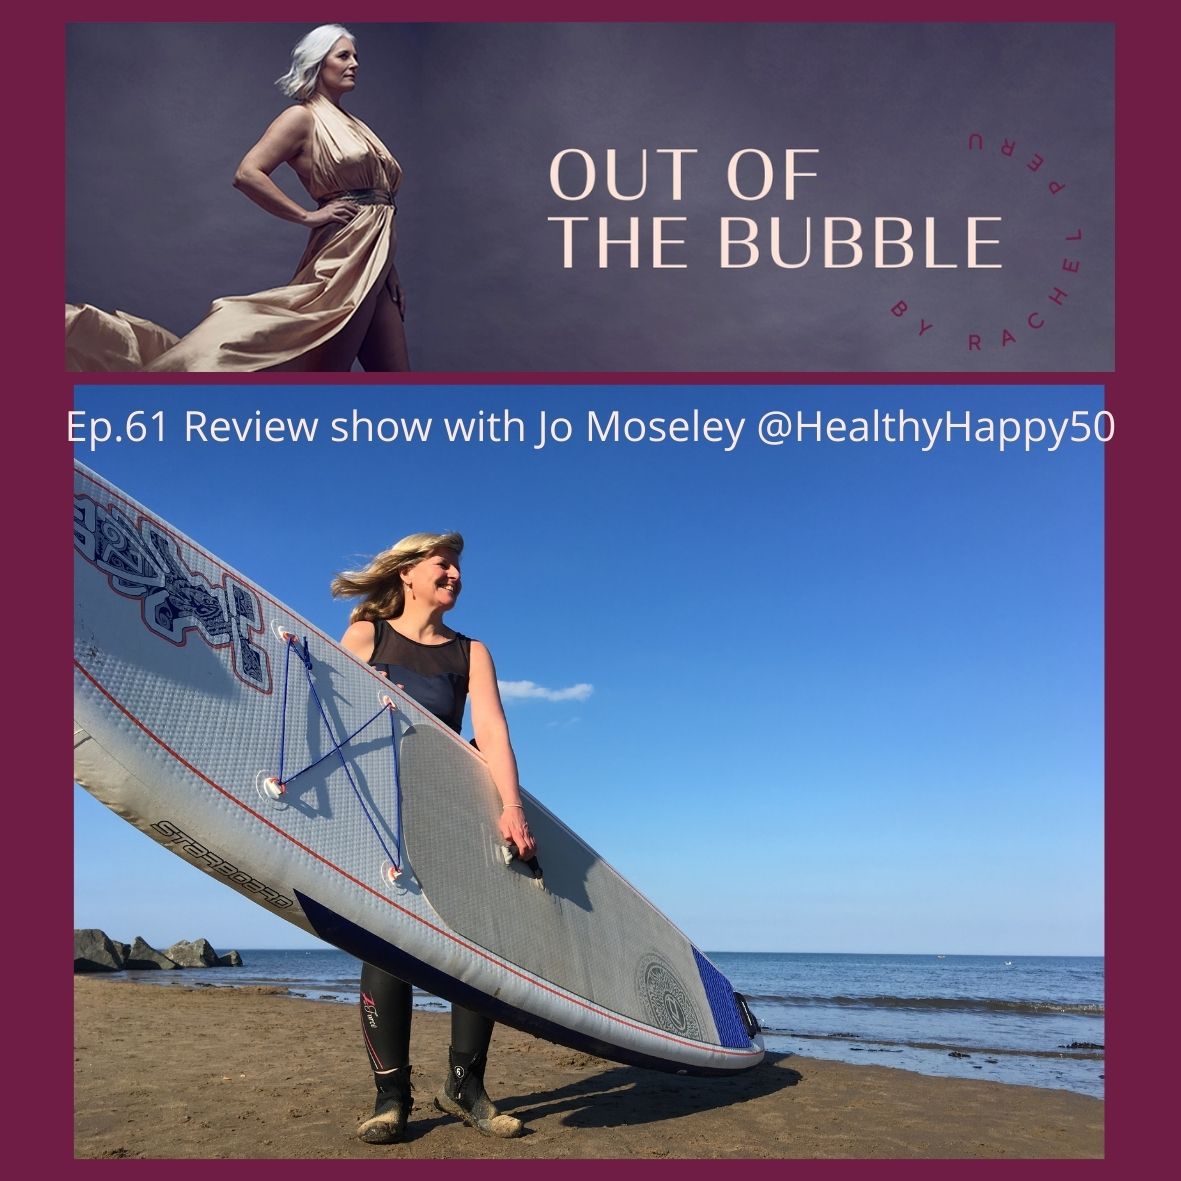 Ep.61- Liberte Free to Be review show with midlife adventurer and Paddle boarder Jo Moseley @Healthyhappy50